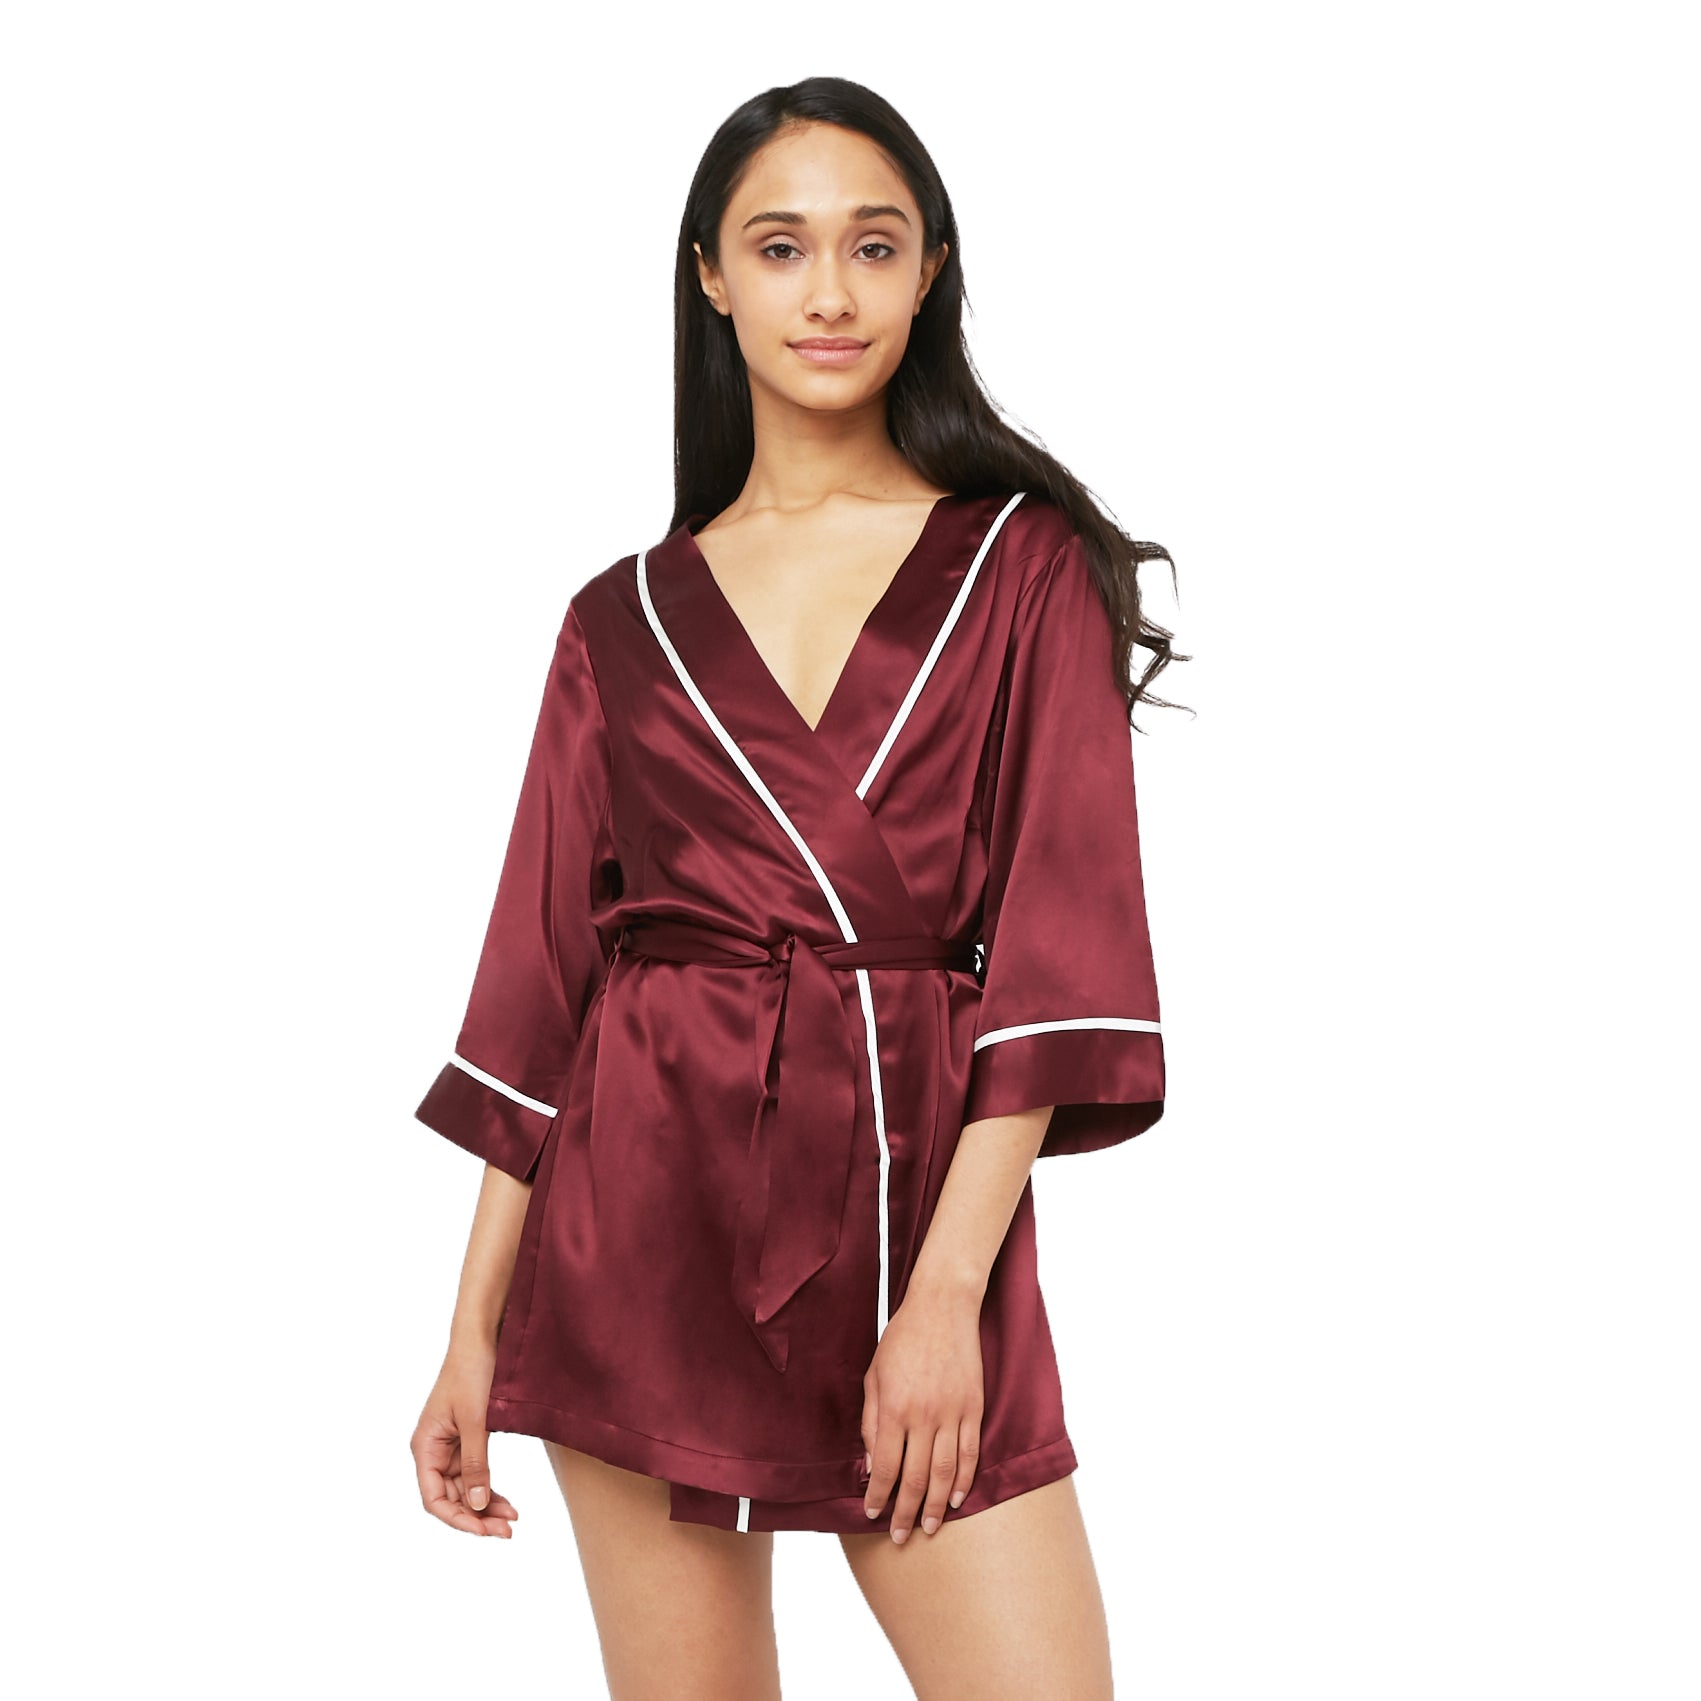 Classic Silk Kimono Styled Robe with Contrast Piping (22 Momme) - MYK Silk #style_kimono style #color_burgundy